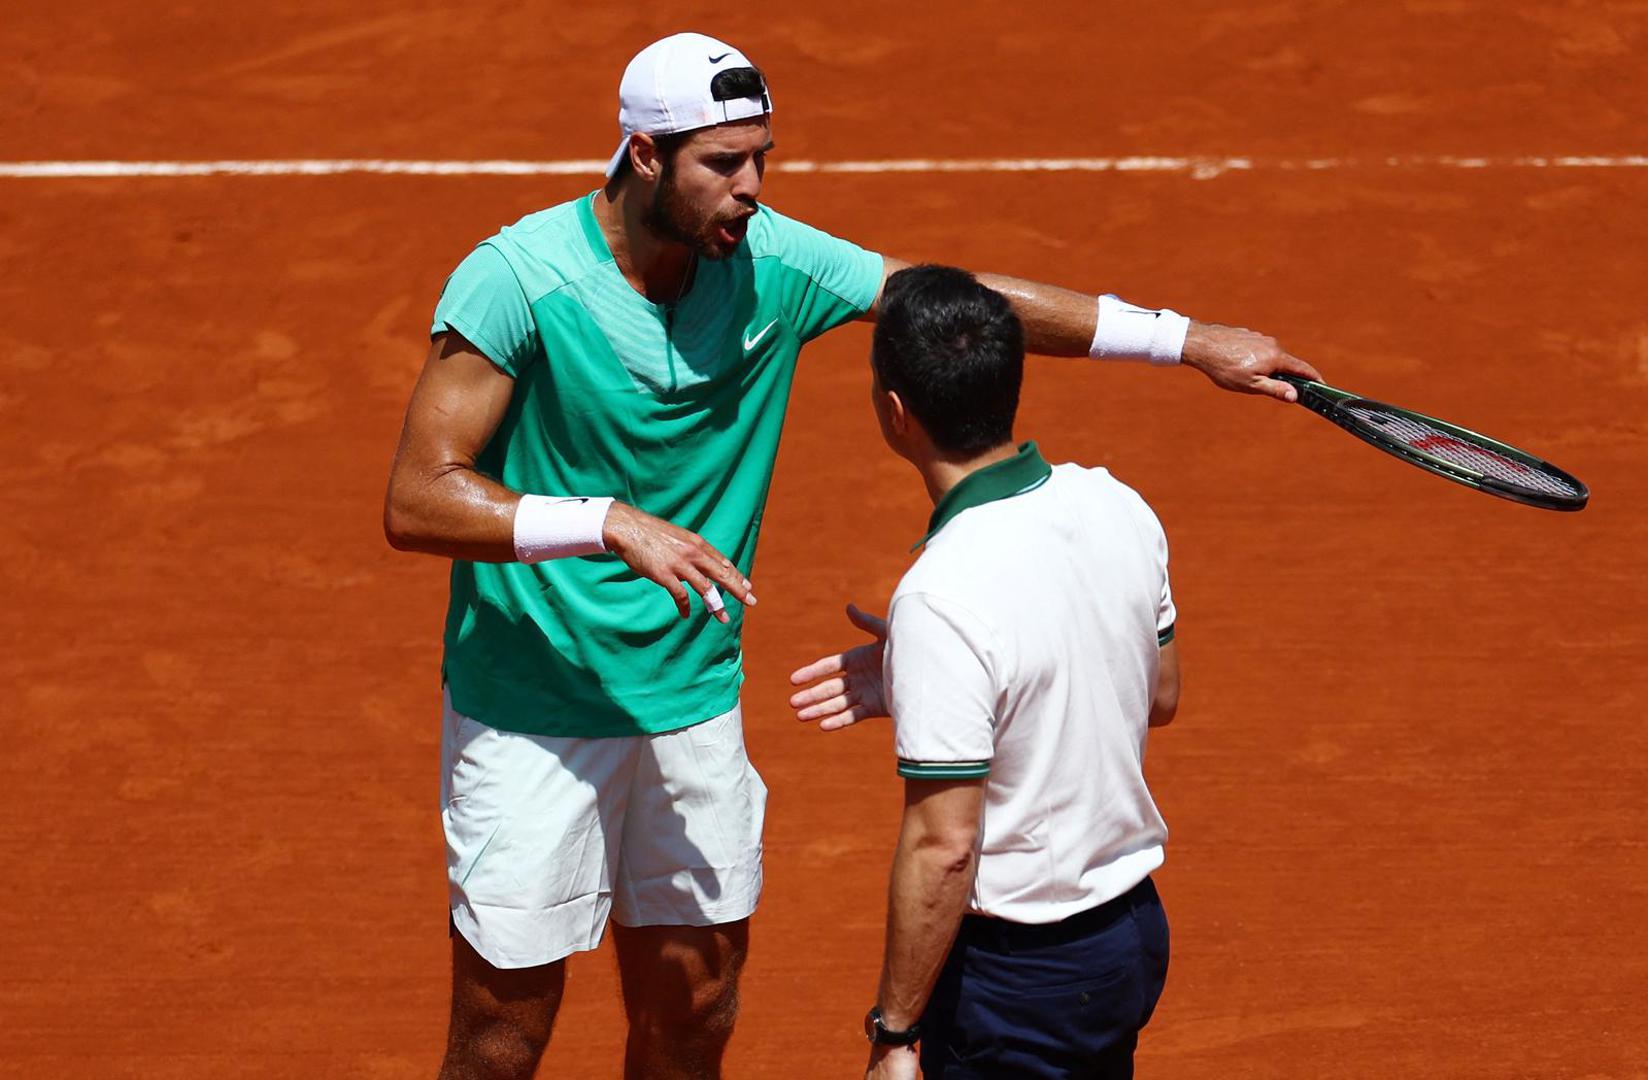 Tennis - French Open - Roland Garros, Paris, France - May 28, 2023 Russia's Karen Khachanov remonstrates with the umpire during his first round match against France's Constant Lestienne REUTERS/Lisi Niesner Photo: LISI NIESNER/REUTERS